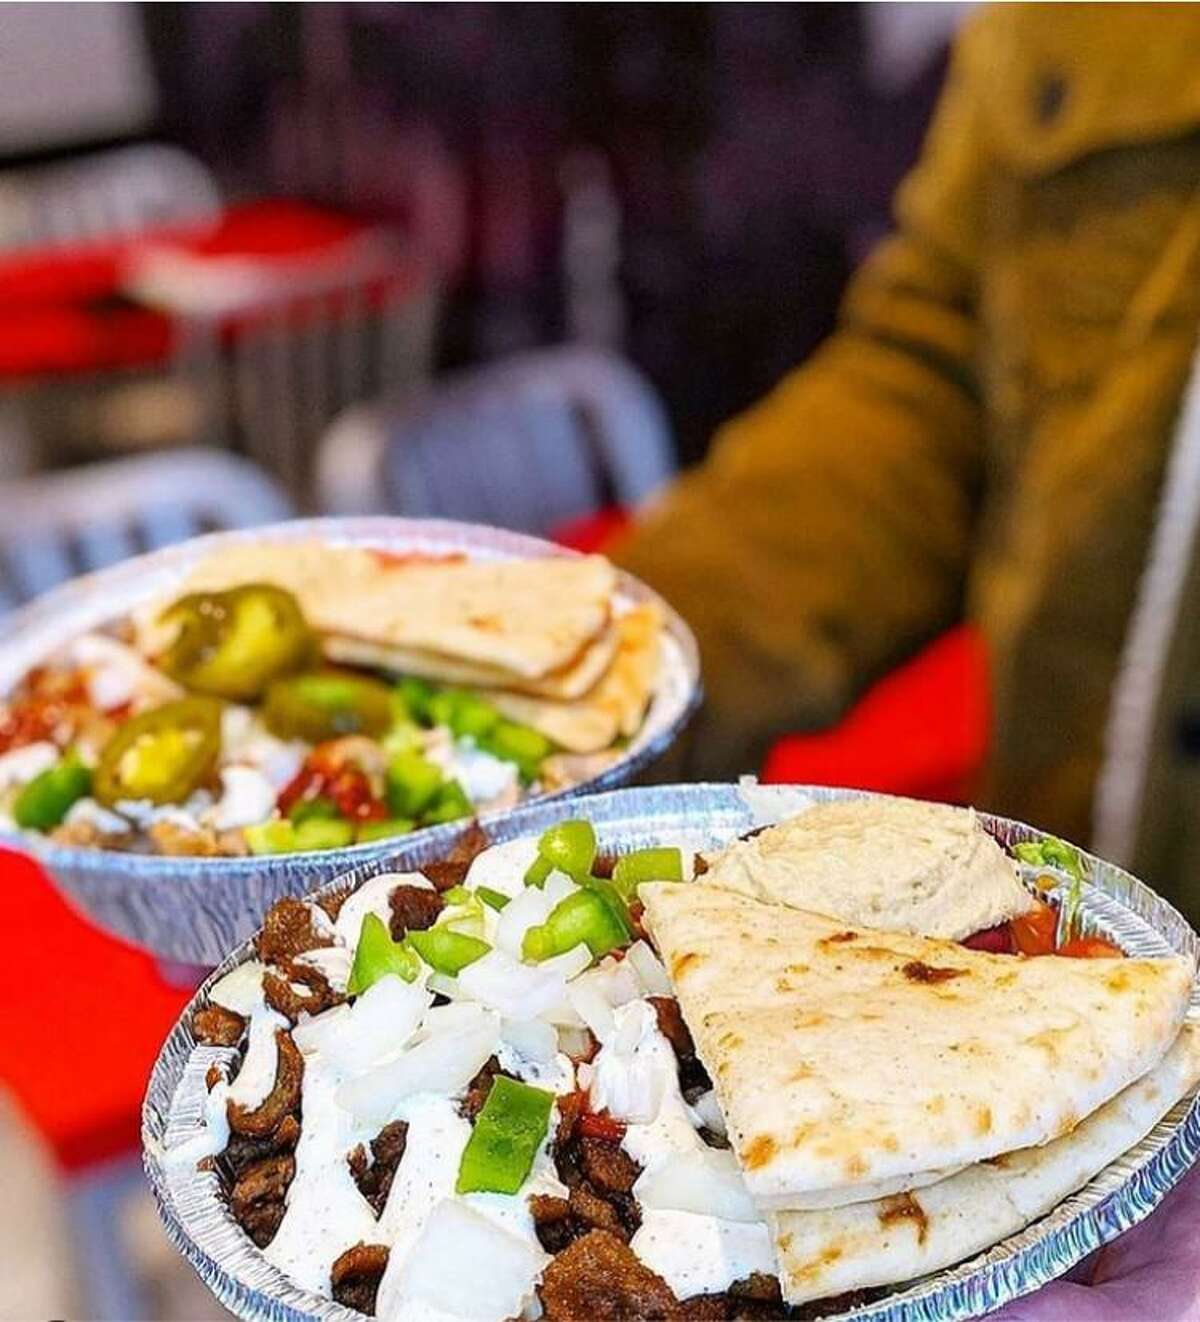 The Halal Guys is bringing street vendor flavors to indoor dining at its newest location in Pearland.